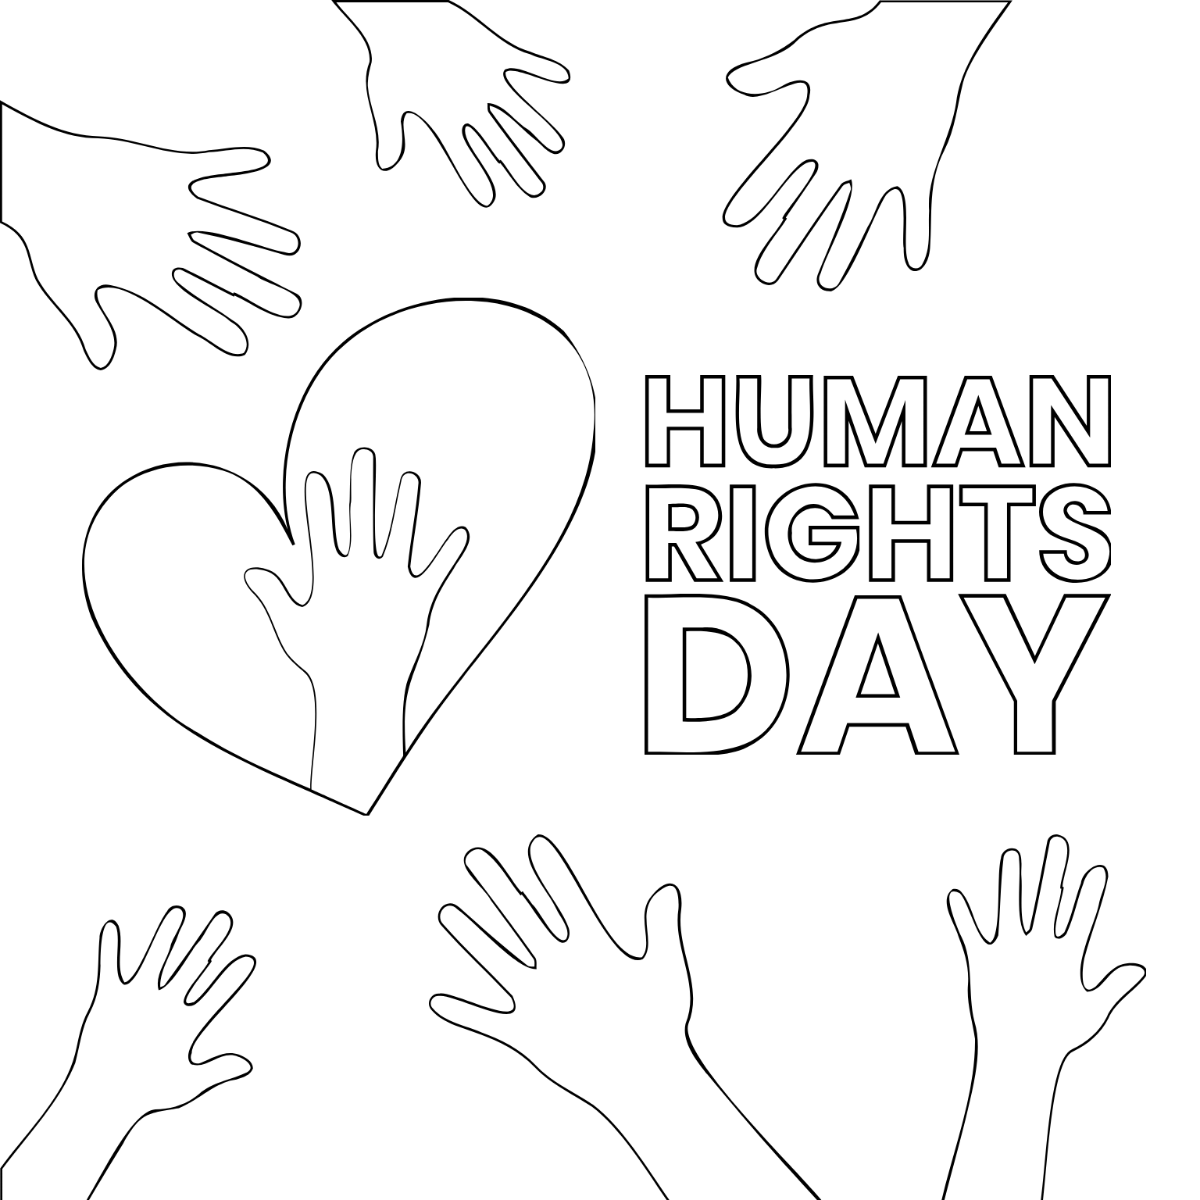 Human Rights Day | San Jose Public Library